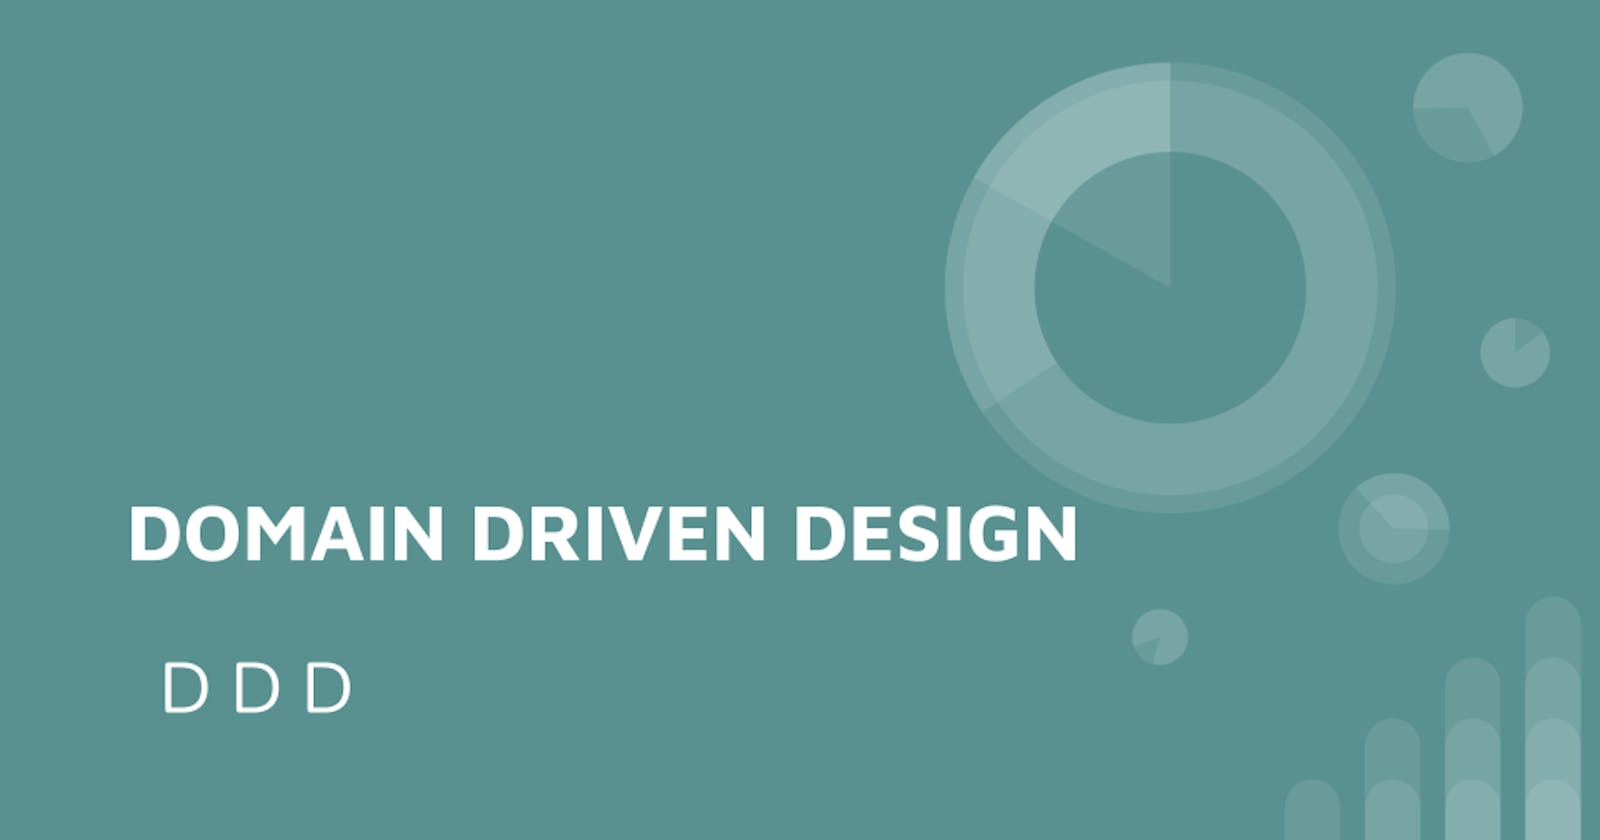 GO - Following the Domain-Driven Design Approach